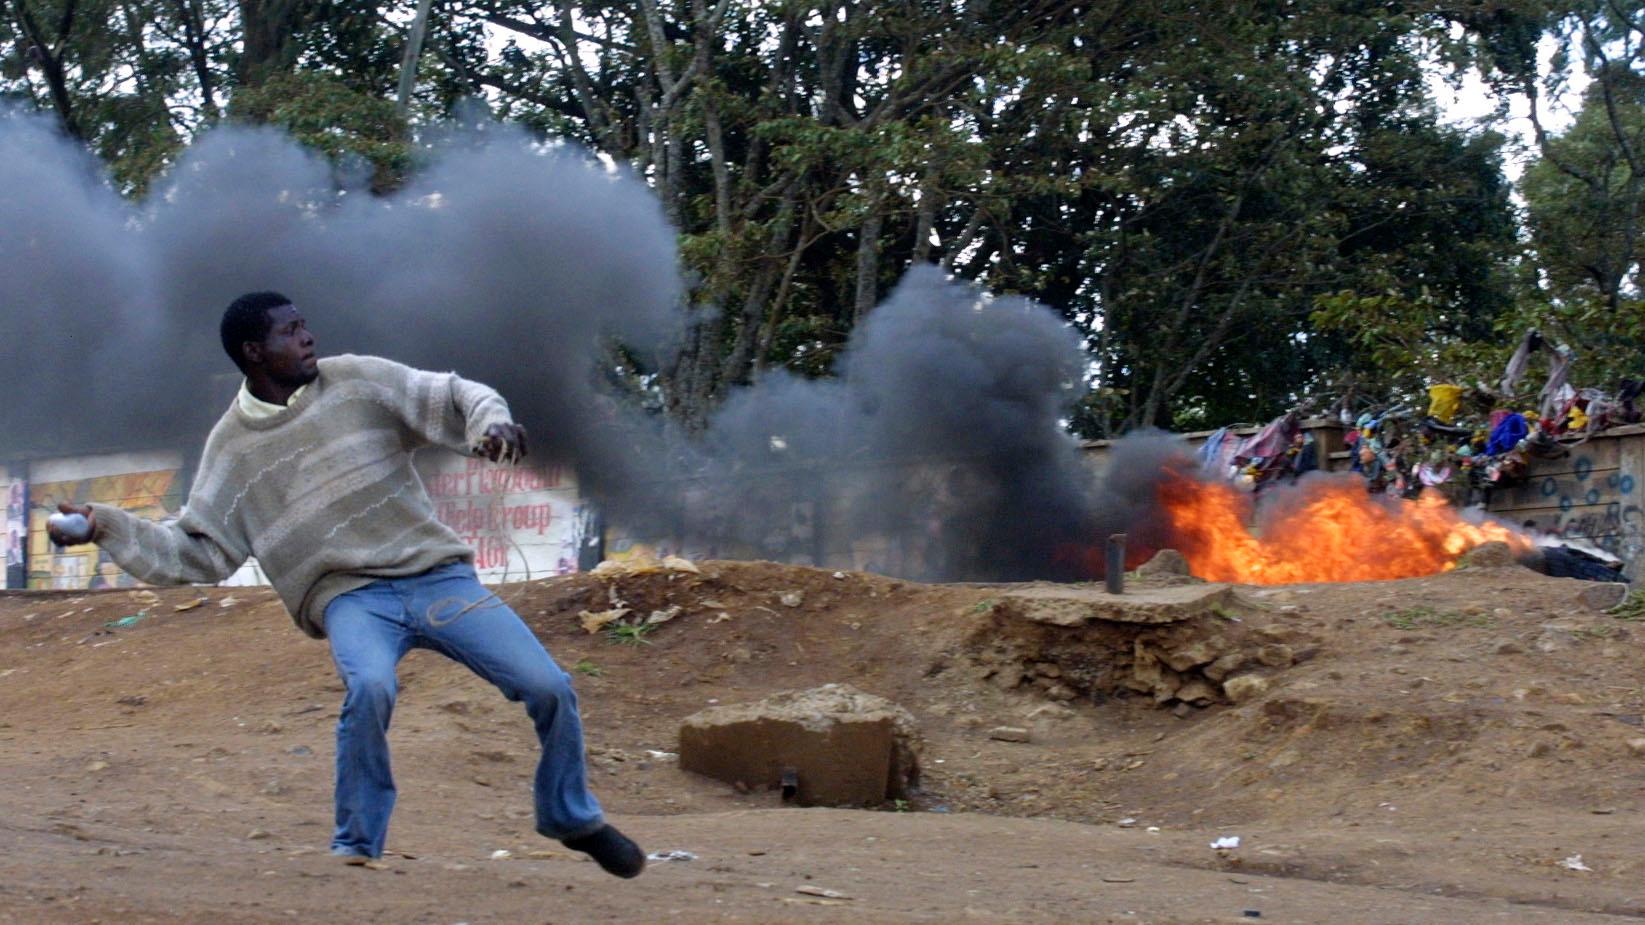 A man wearing jeans and sweater throws a rock near a fire burning outside